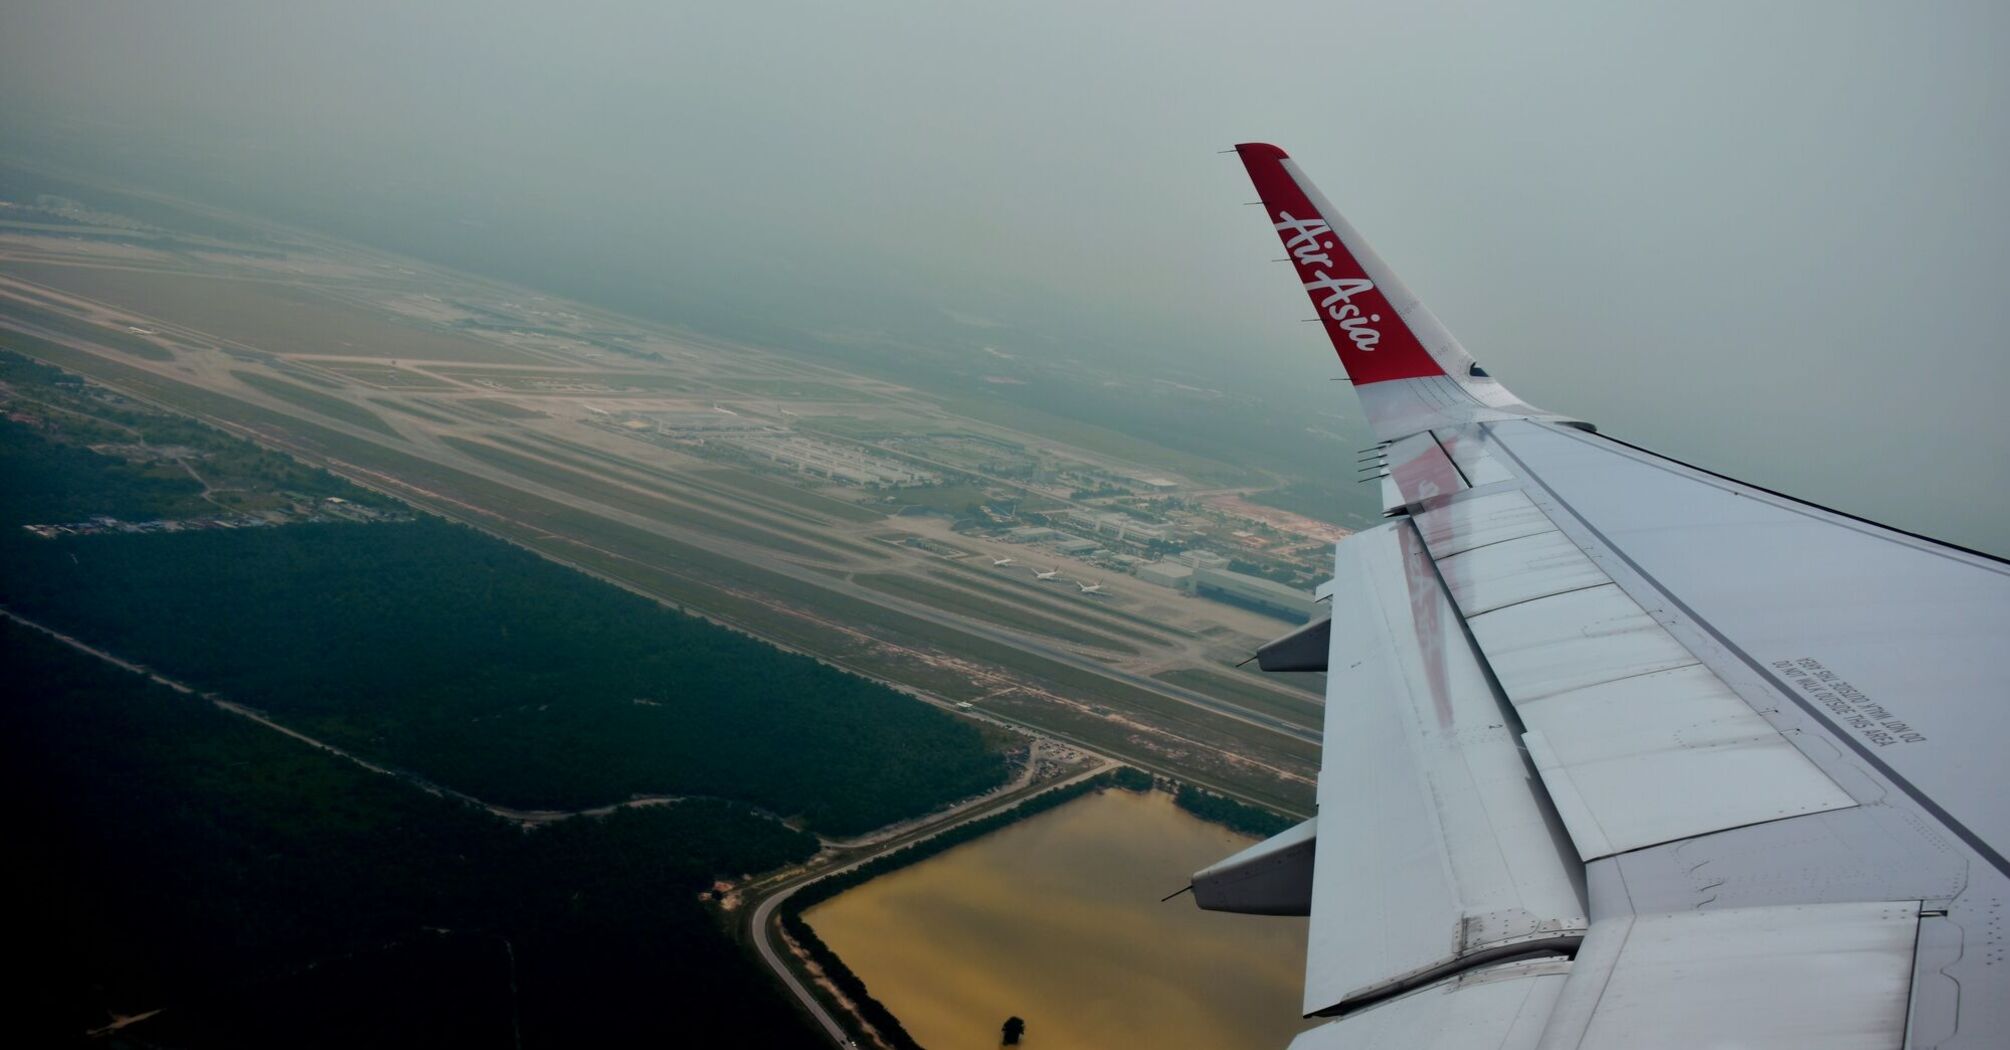 View from an airplane window showing the wing of an AirAsia aircraft with the airline's logo, flying over an airport runway and adjacent water body